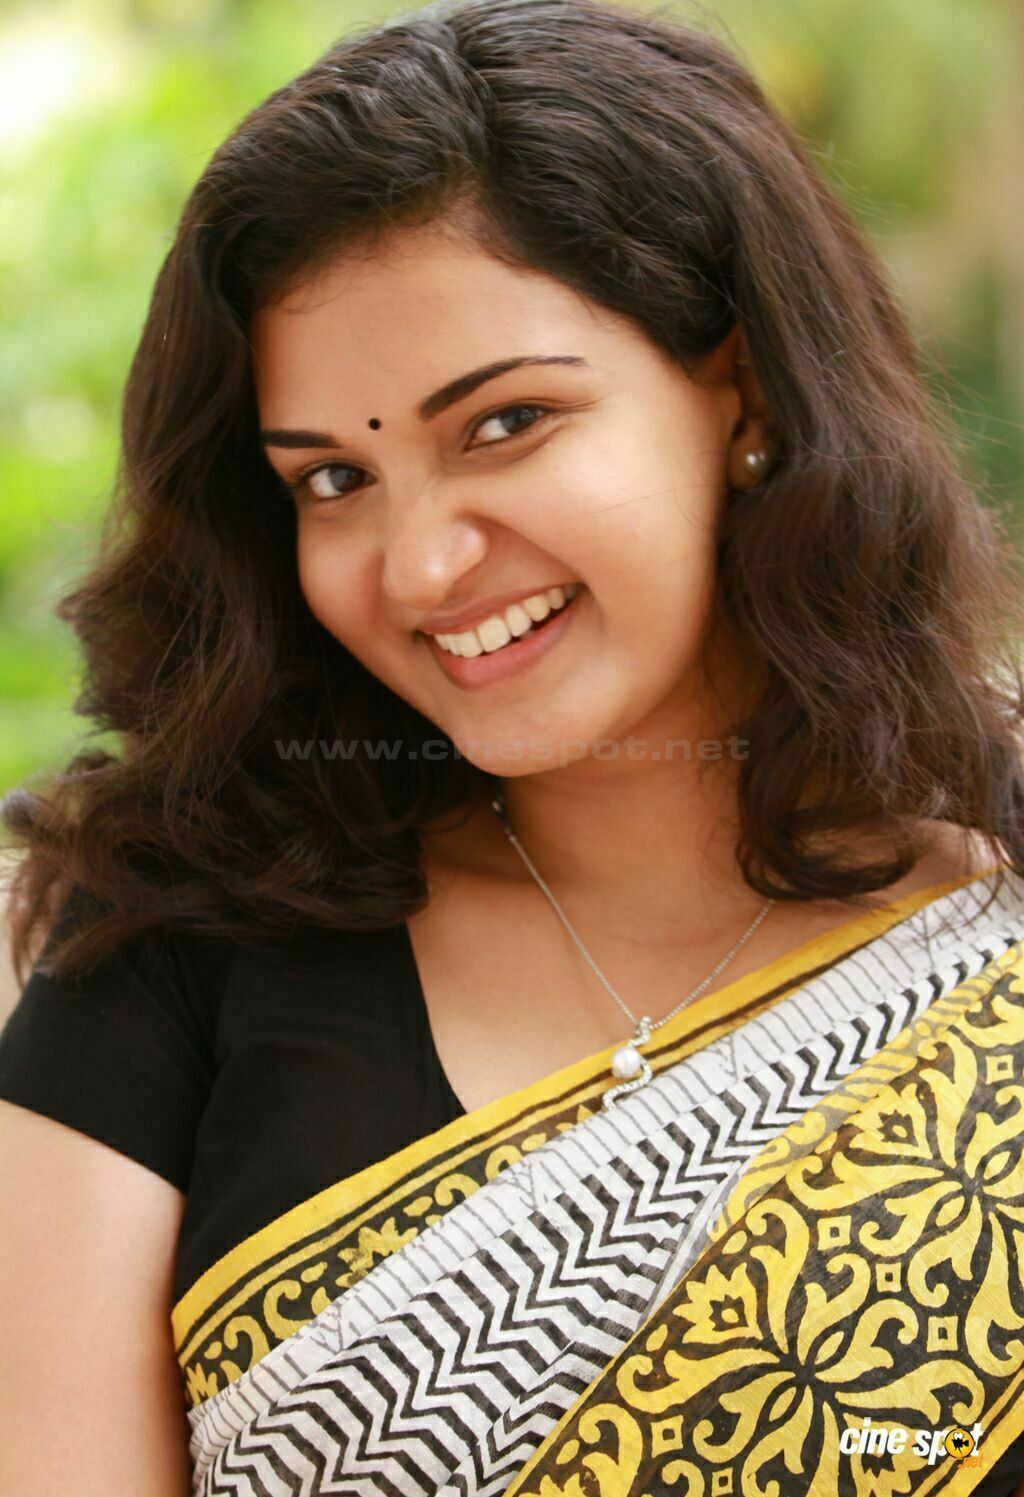 Honey Rose in Thank You (2)